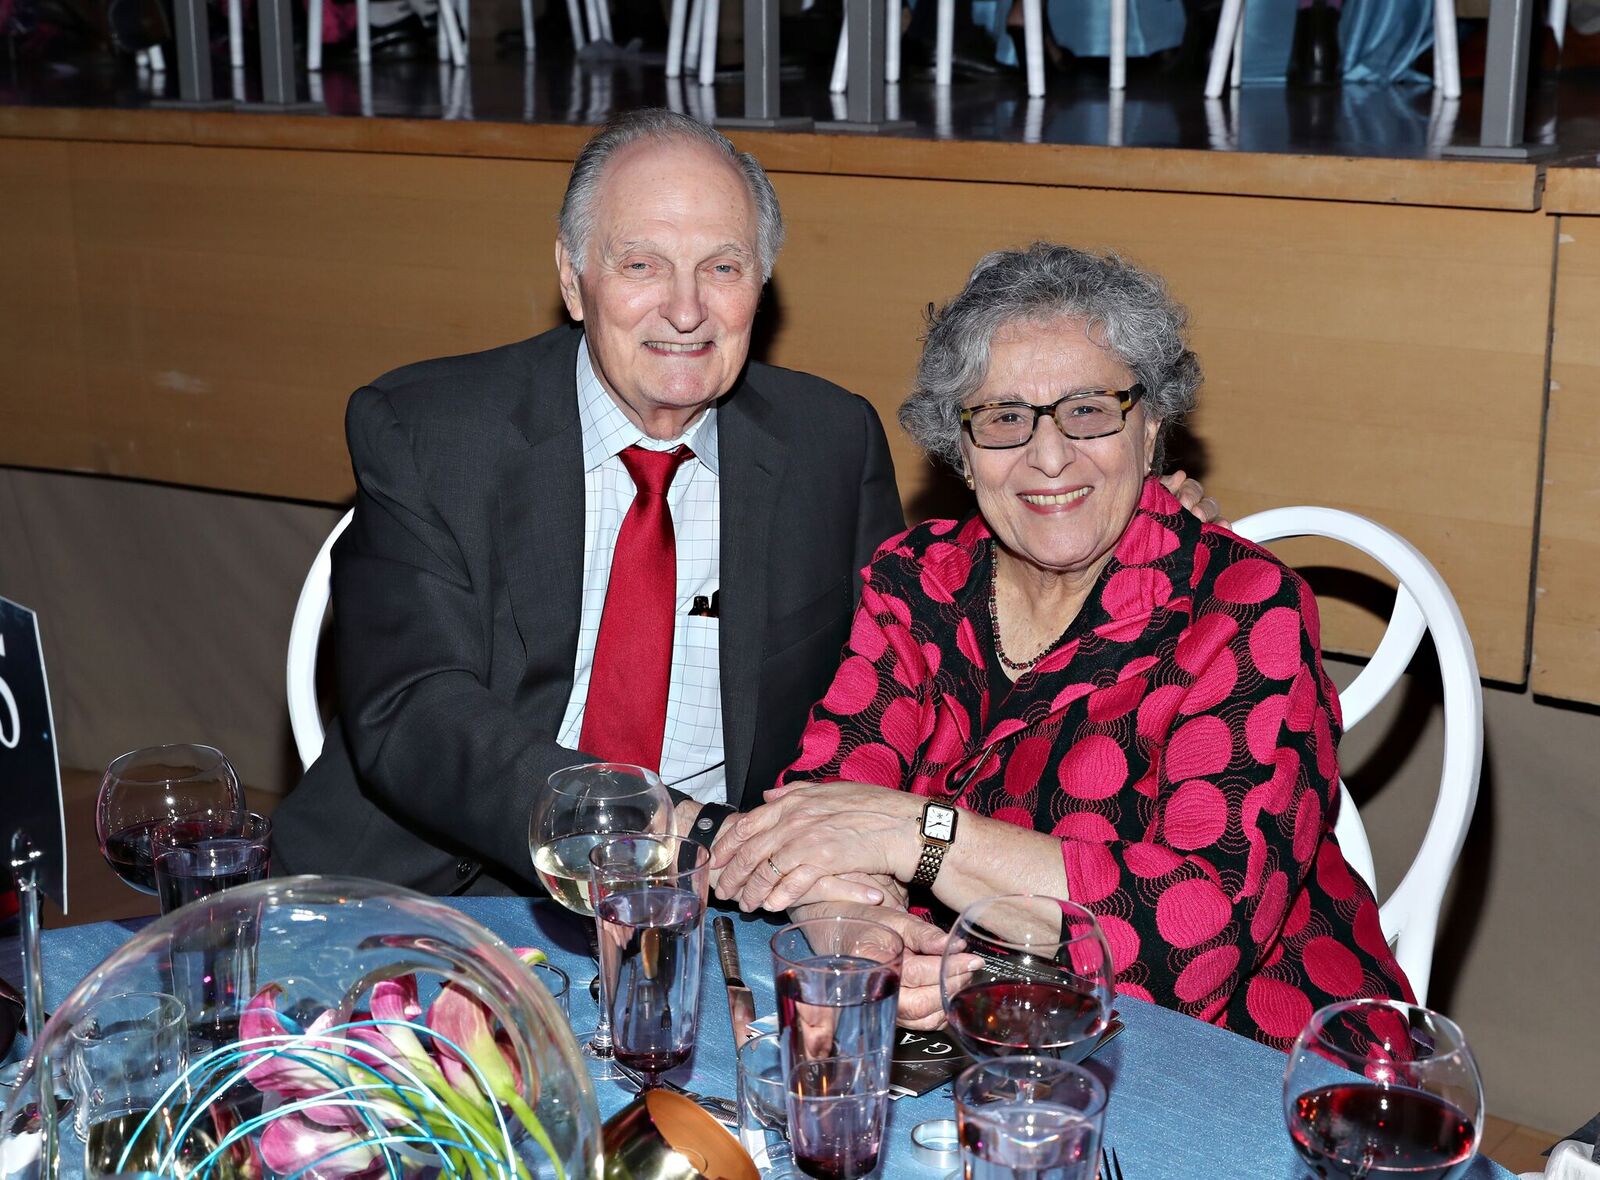 Alan Alda and wife Arlene Alda attend the World Science Festival's 12th Annual Gala at Jazz at Lincoln Center on May 22, 2019. | Source: Getty Images